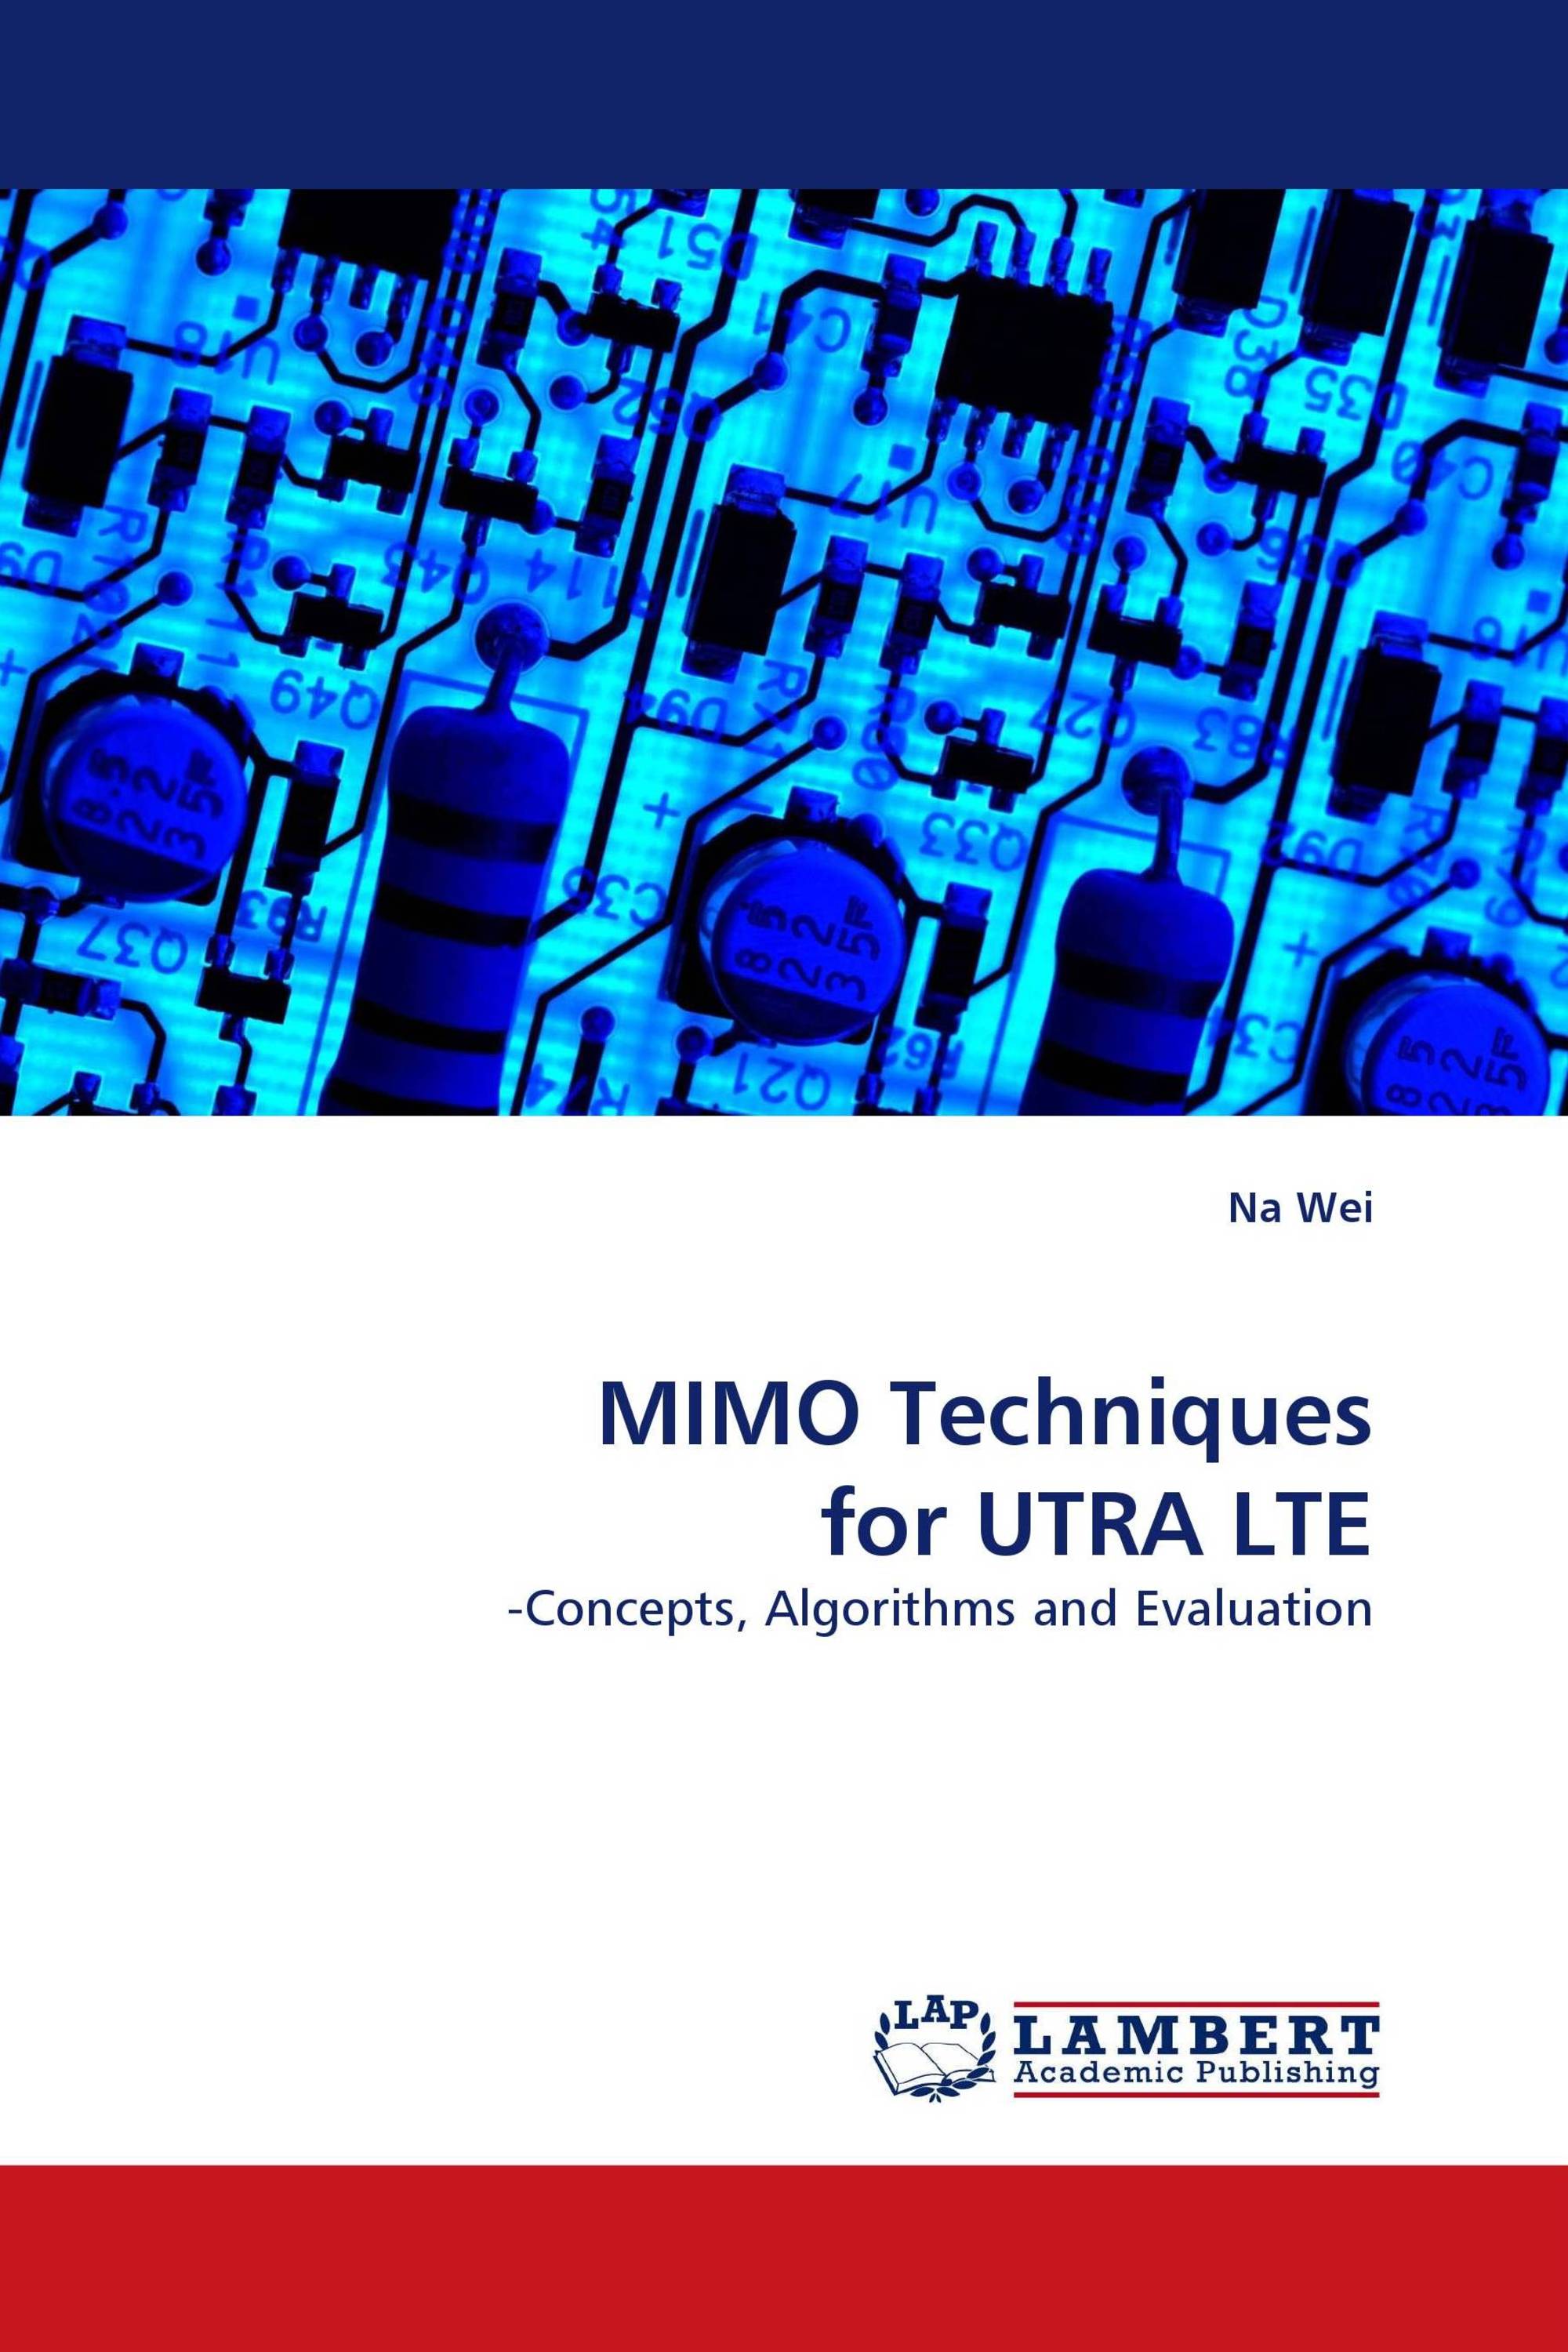 MIMO Techniques for UTRA LTE